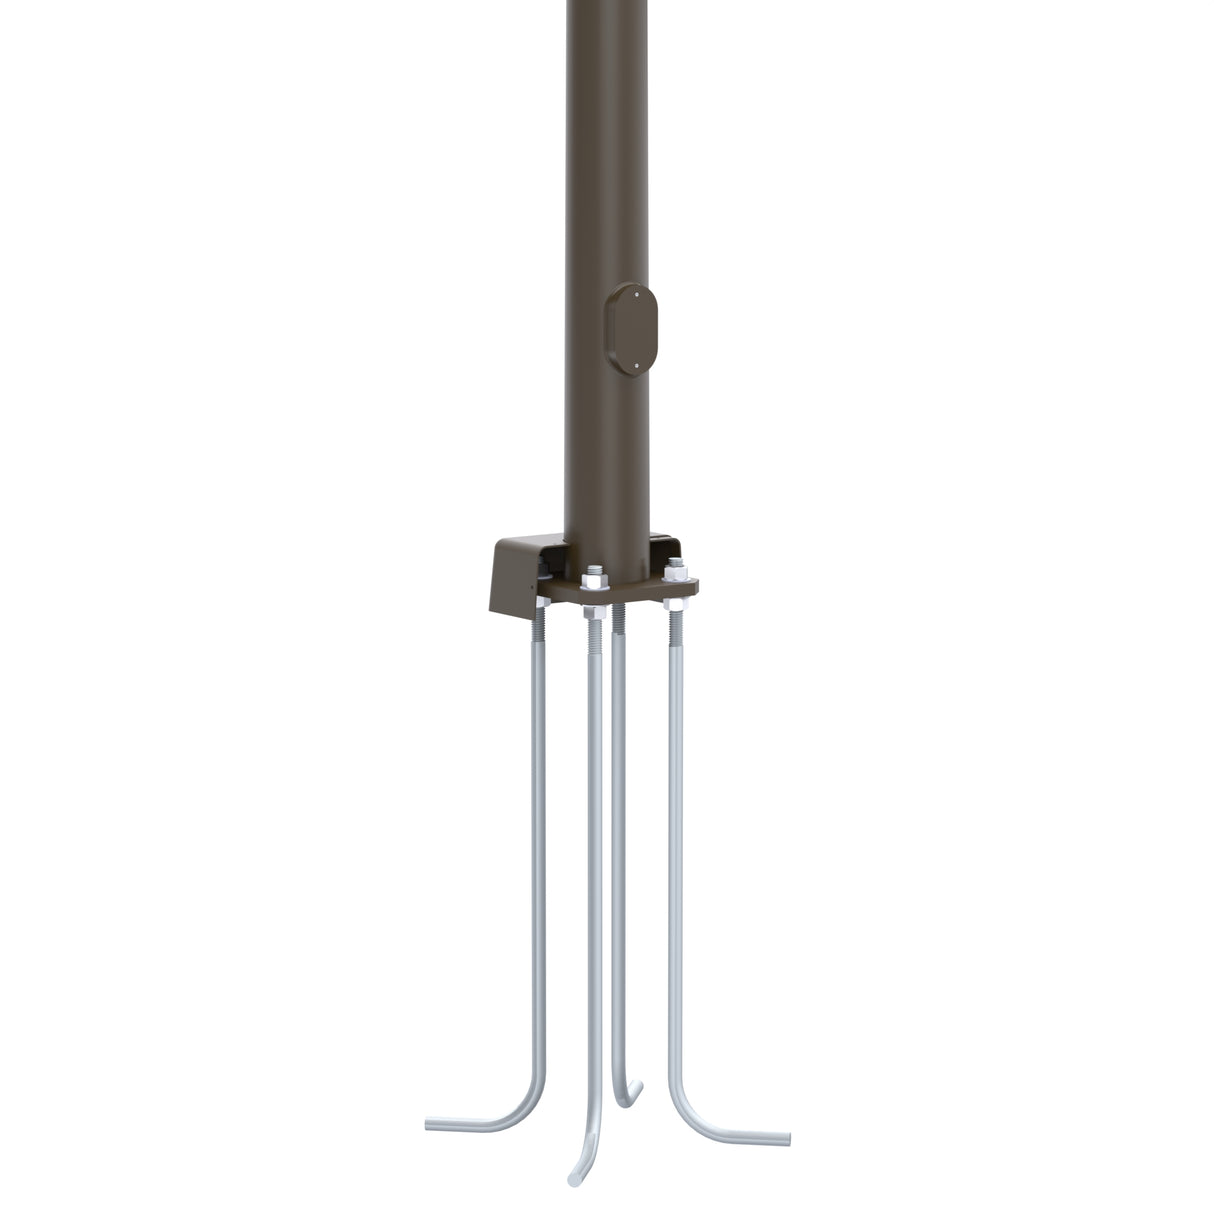 35' Tall x 8.5" Base OD x 3.6" Top OD x 11ga Thick, Round Tapered Steel, Anchor Base Light Pole